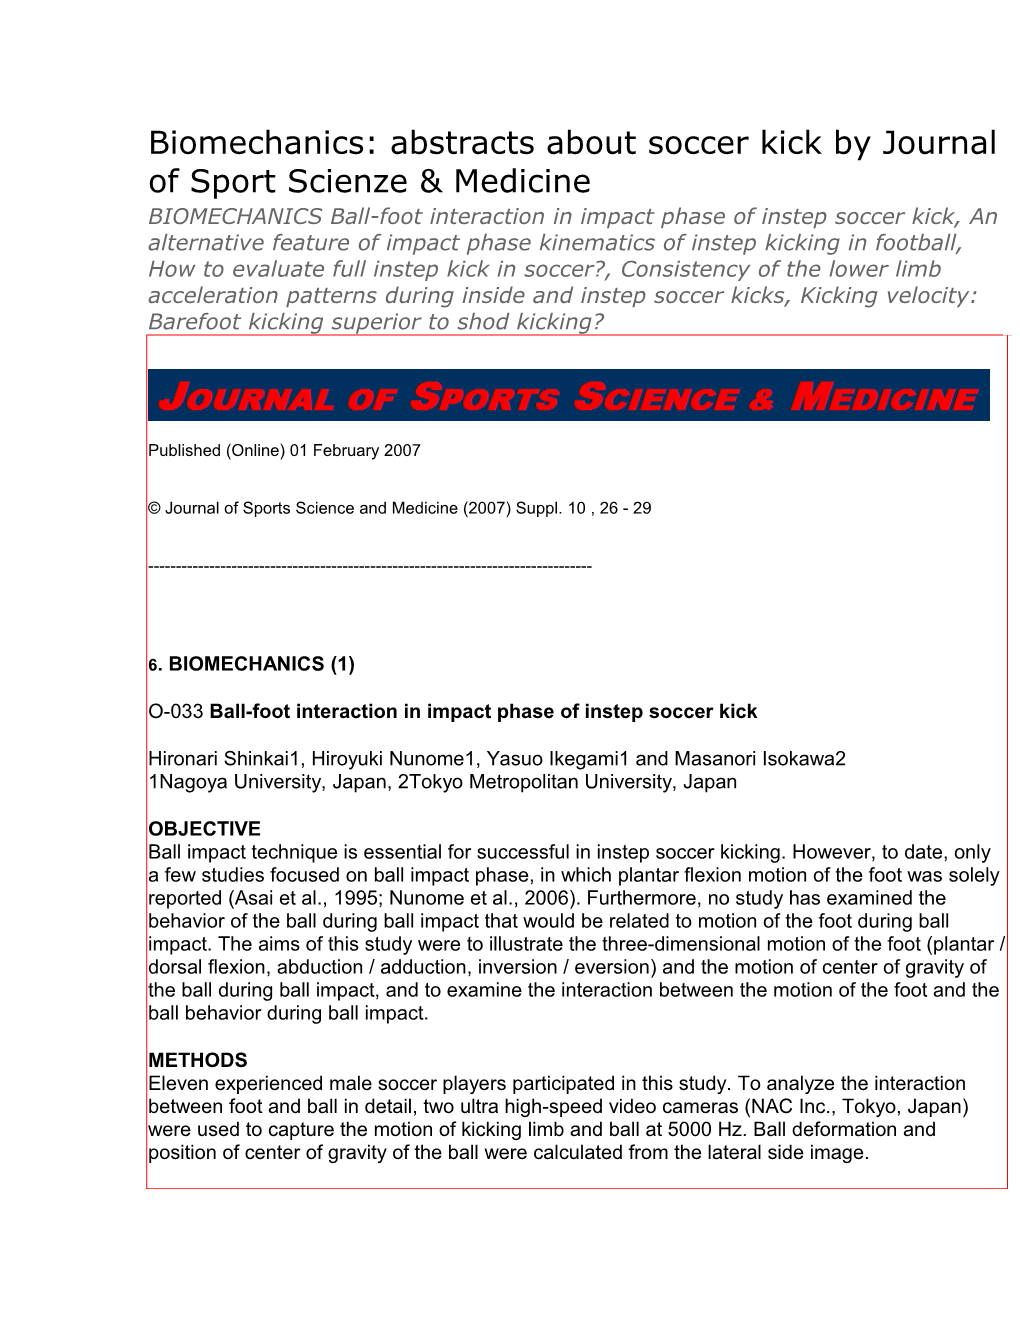 Biomechanics: Abstracts About Soccer Kick by Journal of Sport Scienze & Medicine